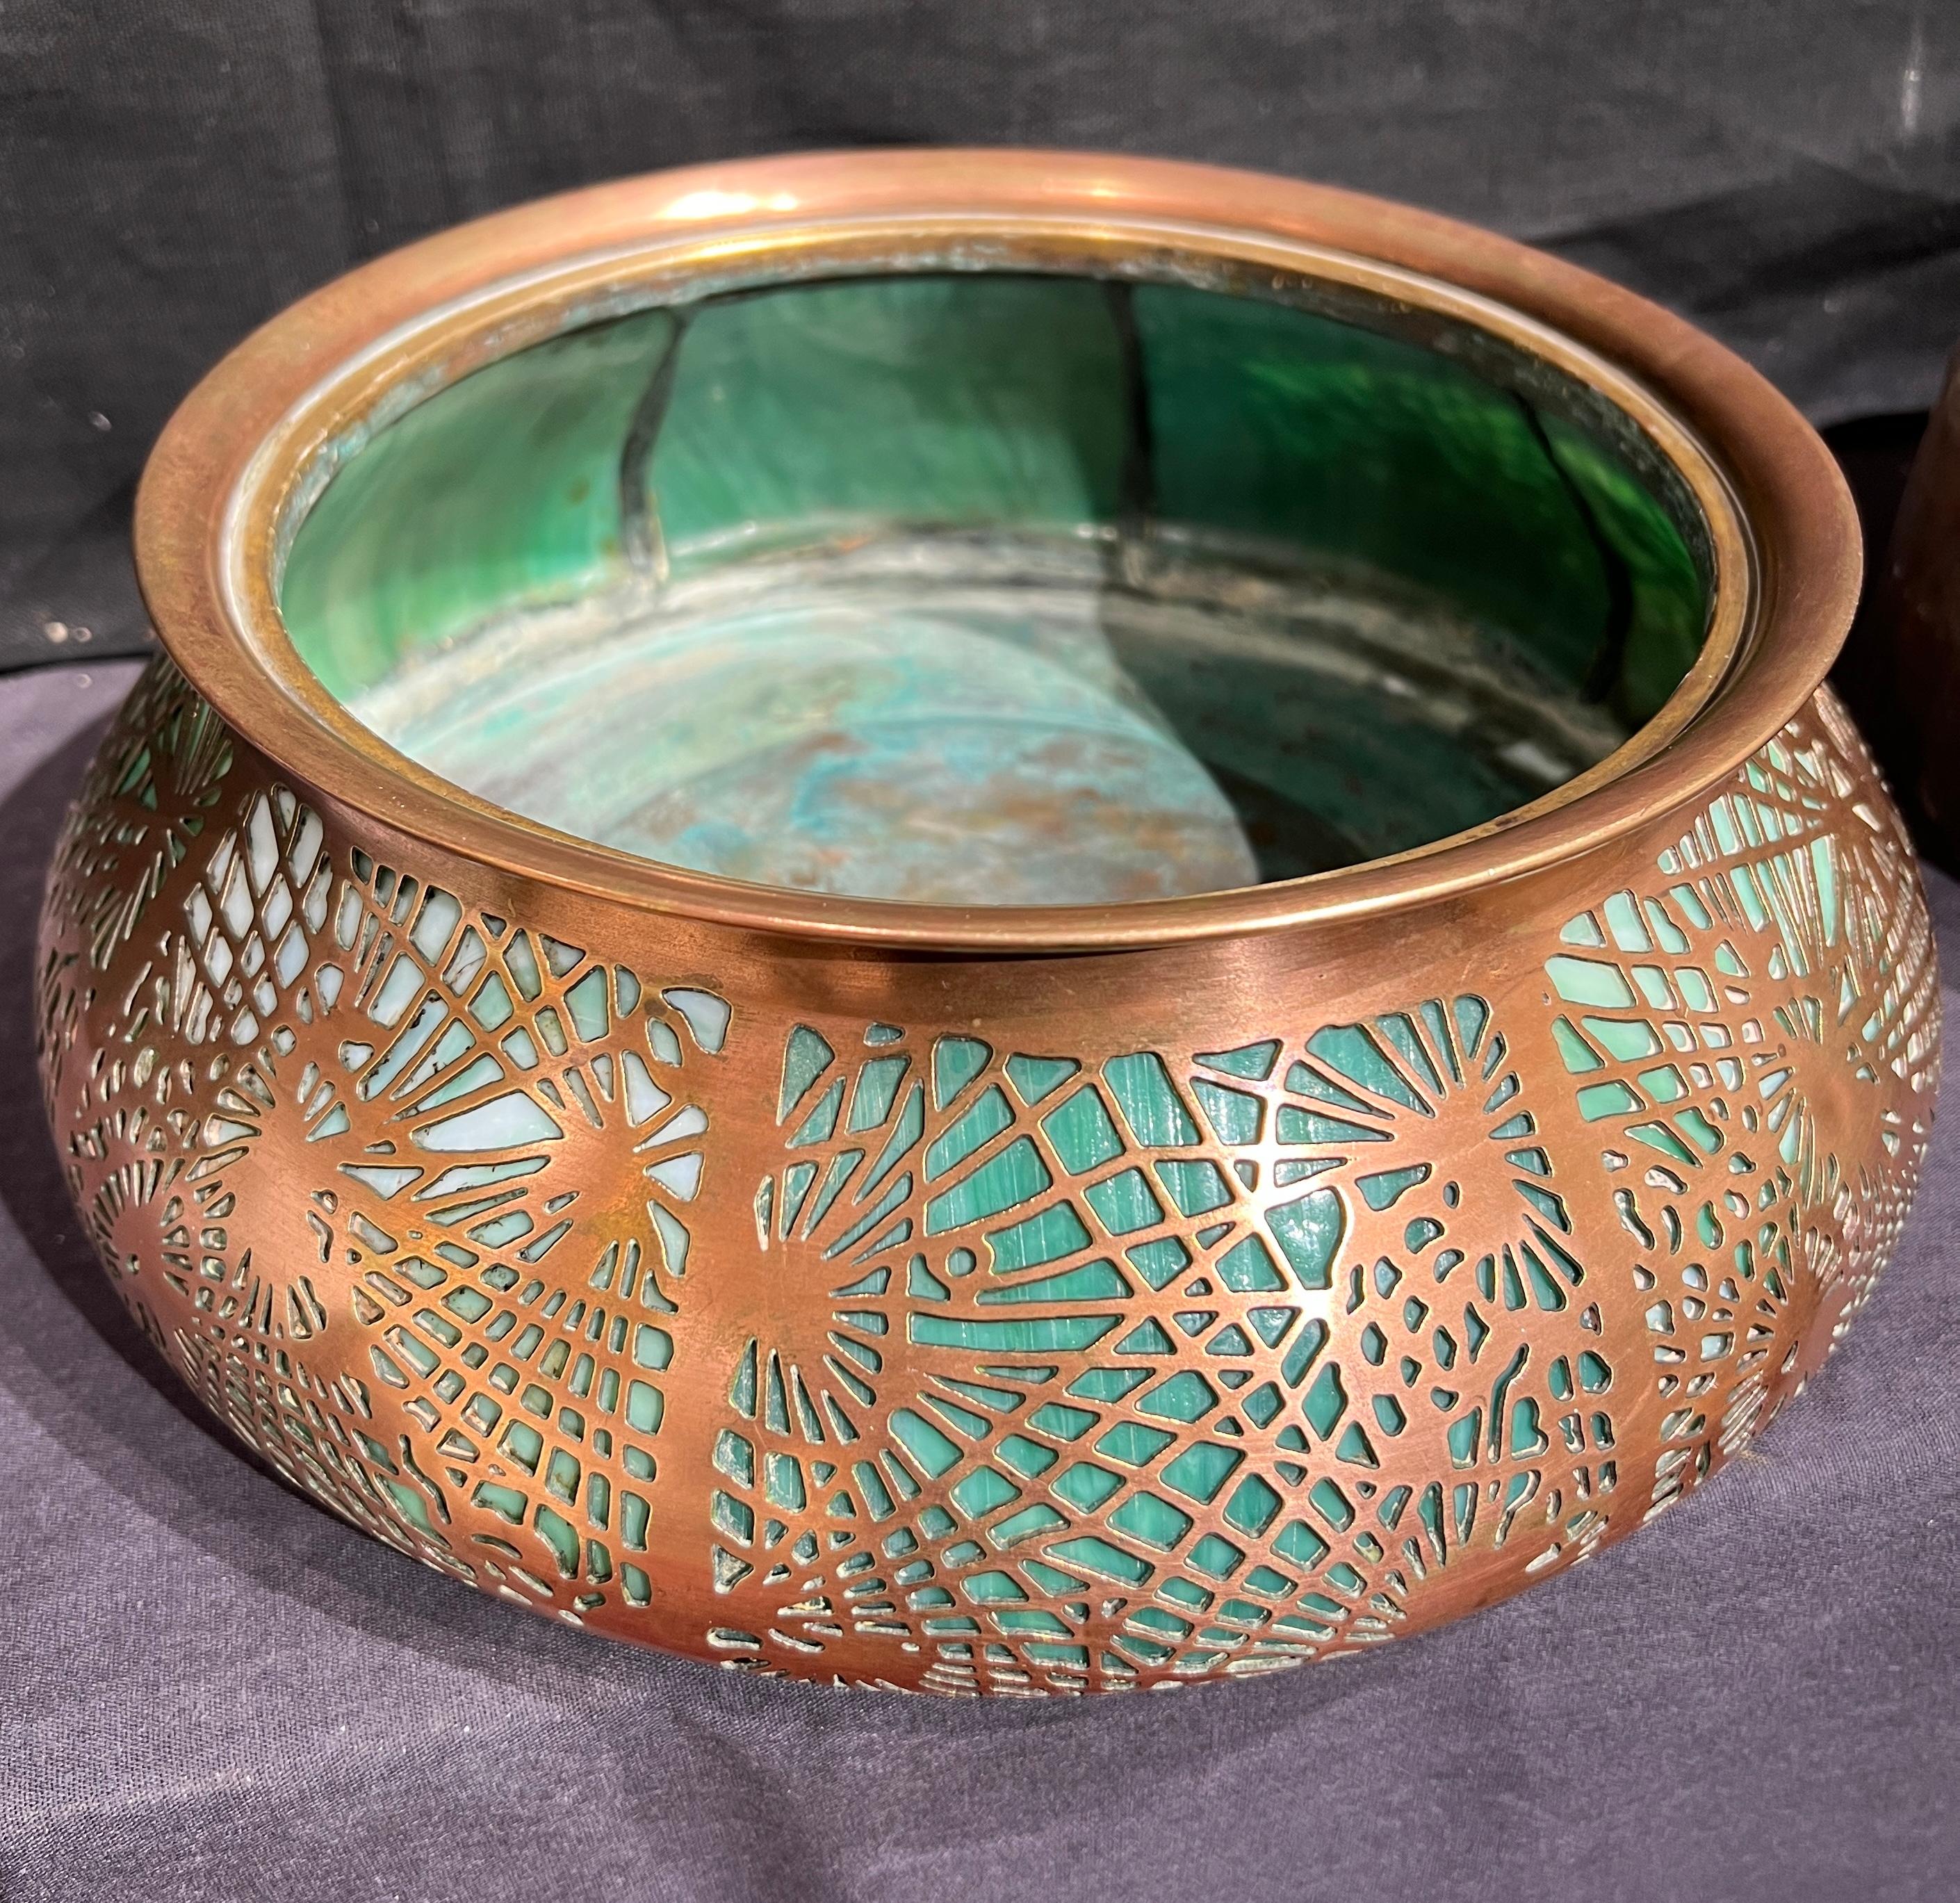 Tiffany Jardiniere with Emerald Favrile Inlay - Modern Art by Louis Comfort Tiffany